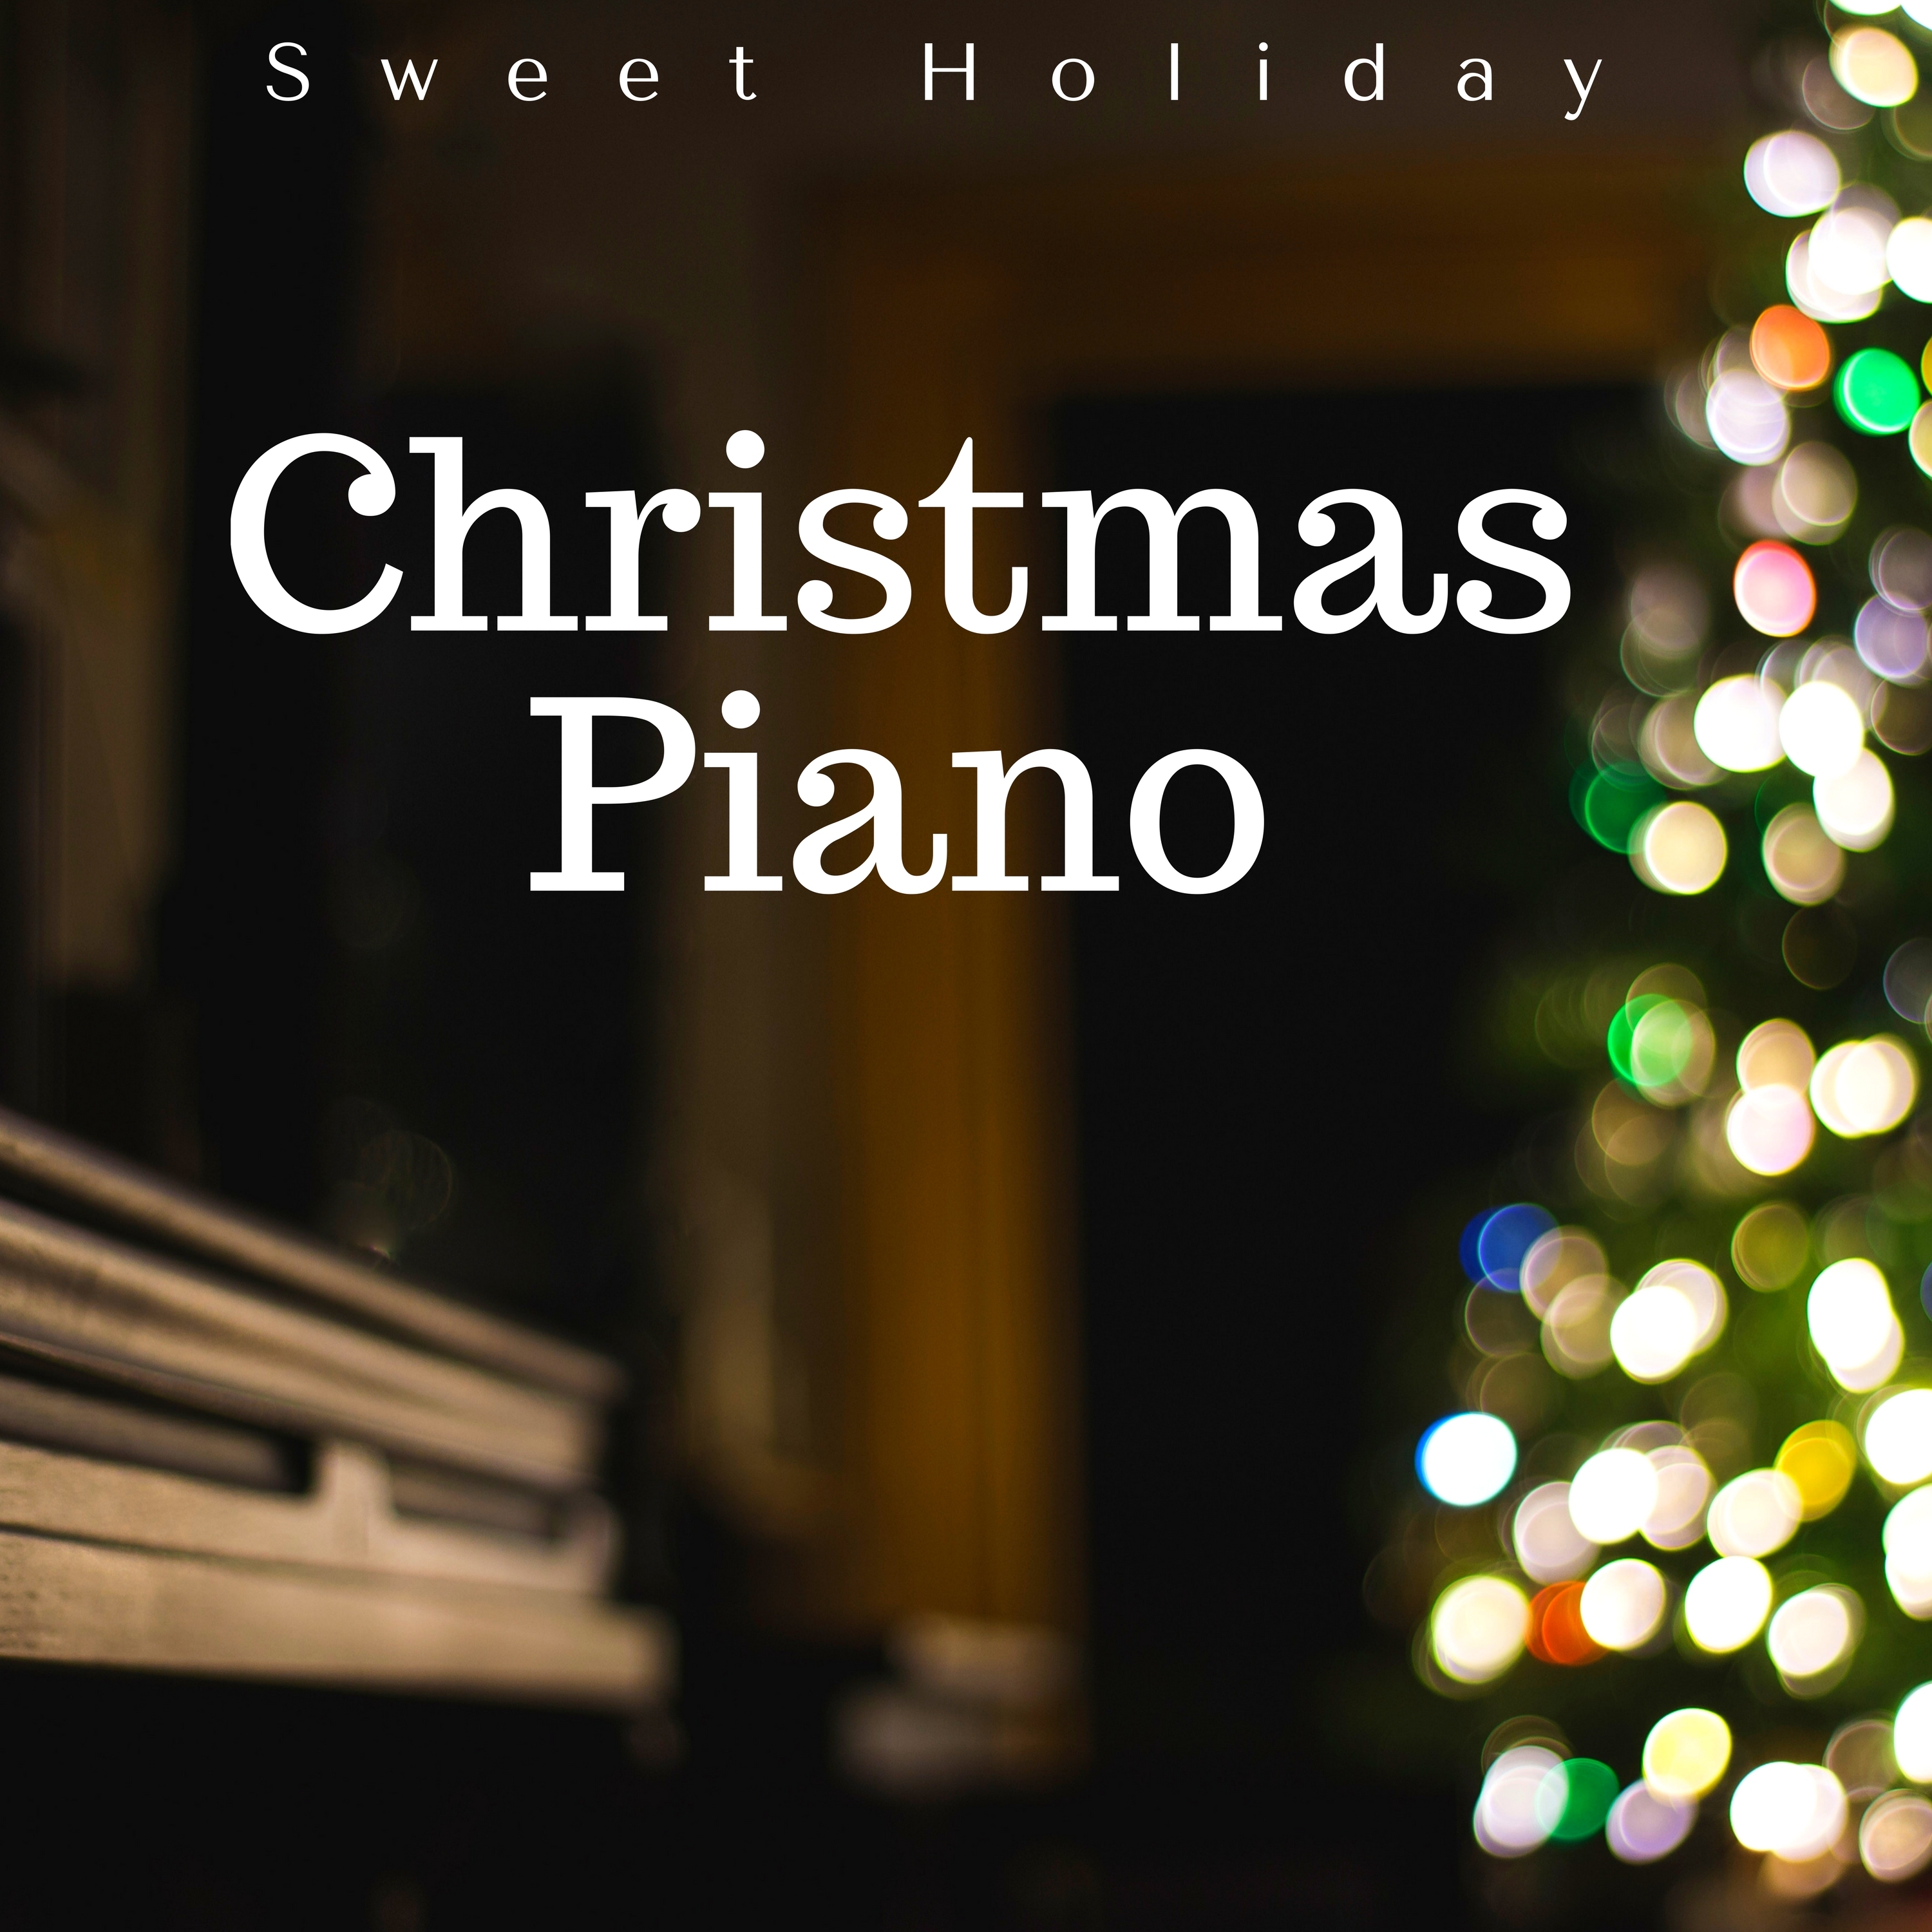 Christmas Piano: Sweet Holiday, Piano Music, Relaxing Sounds for Christmas Break